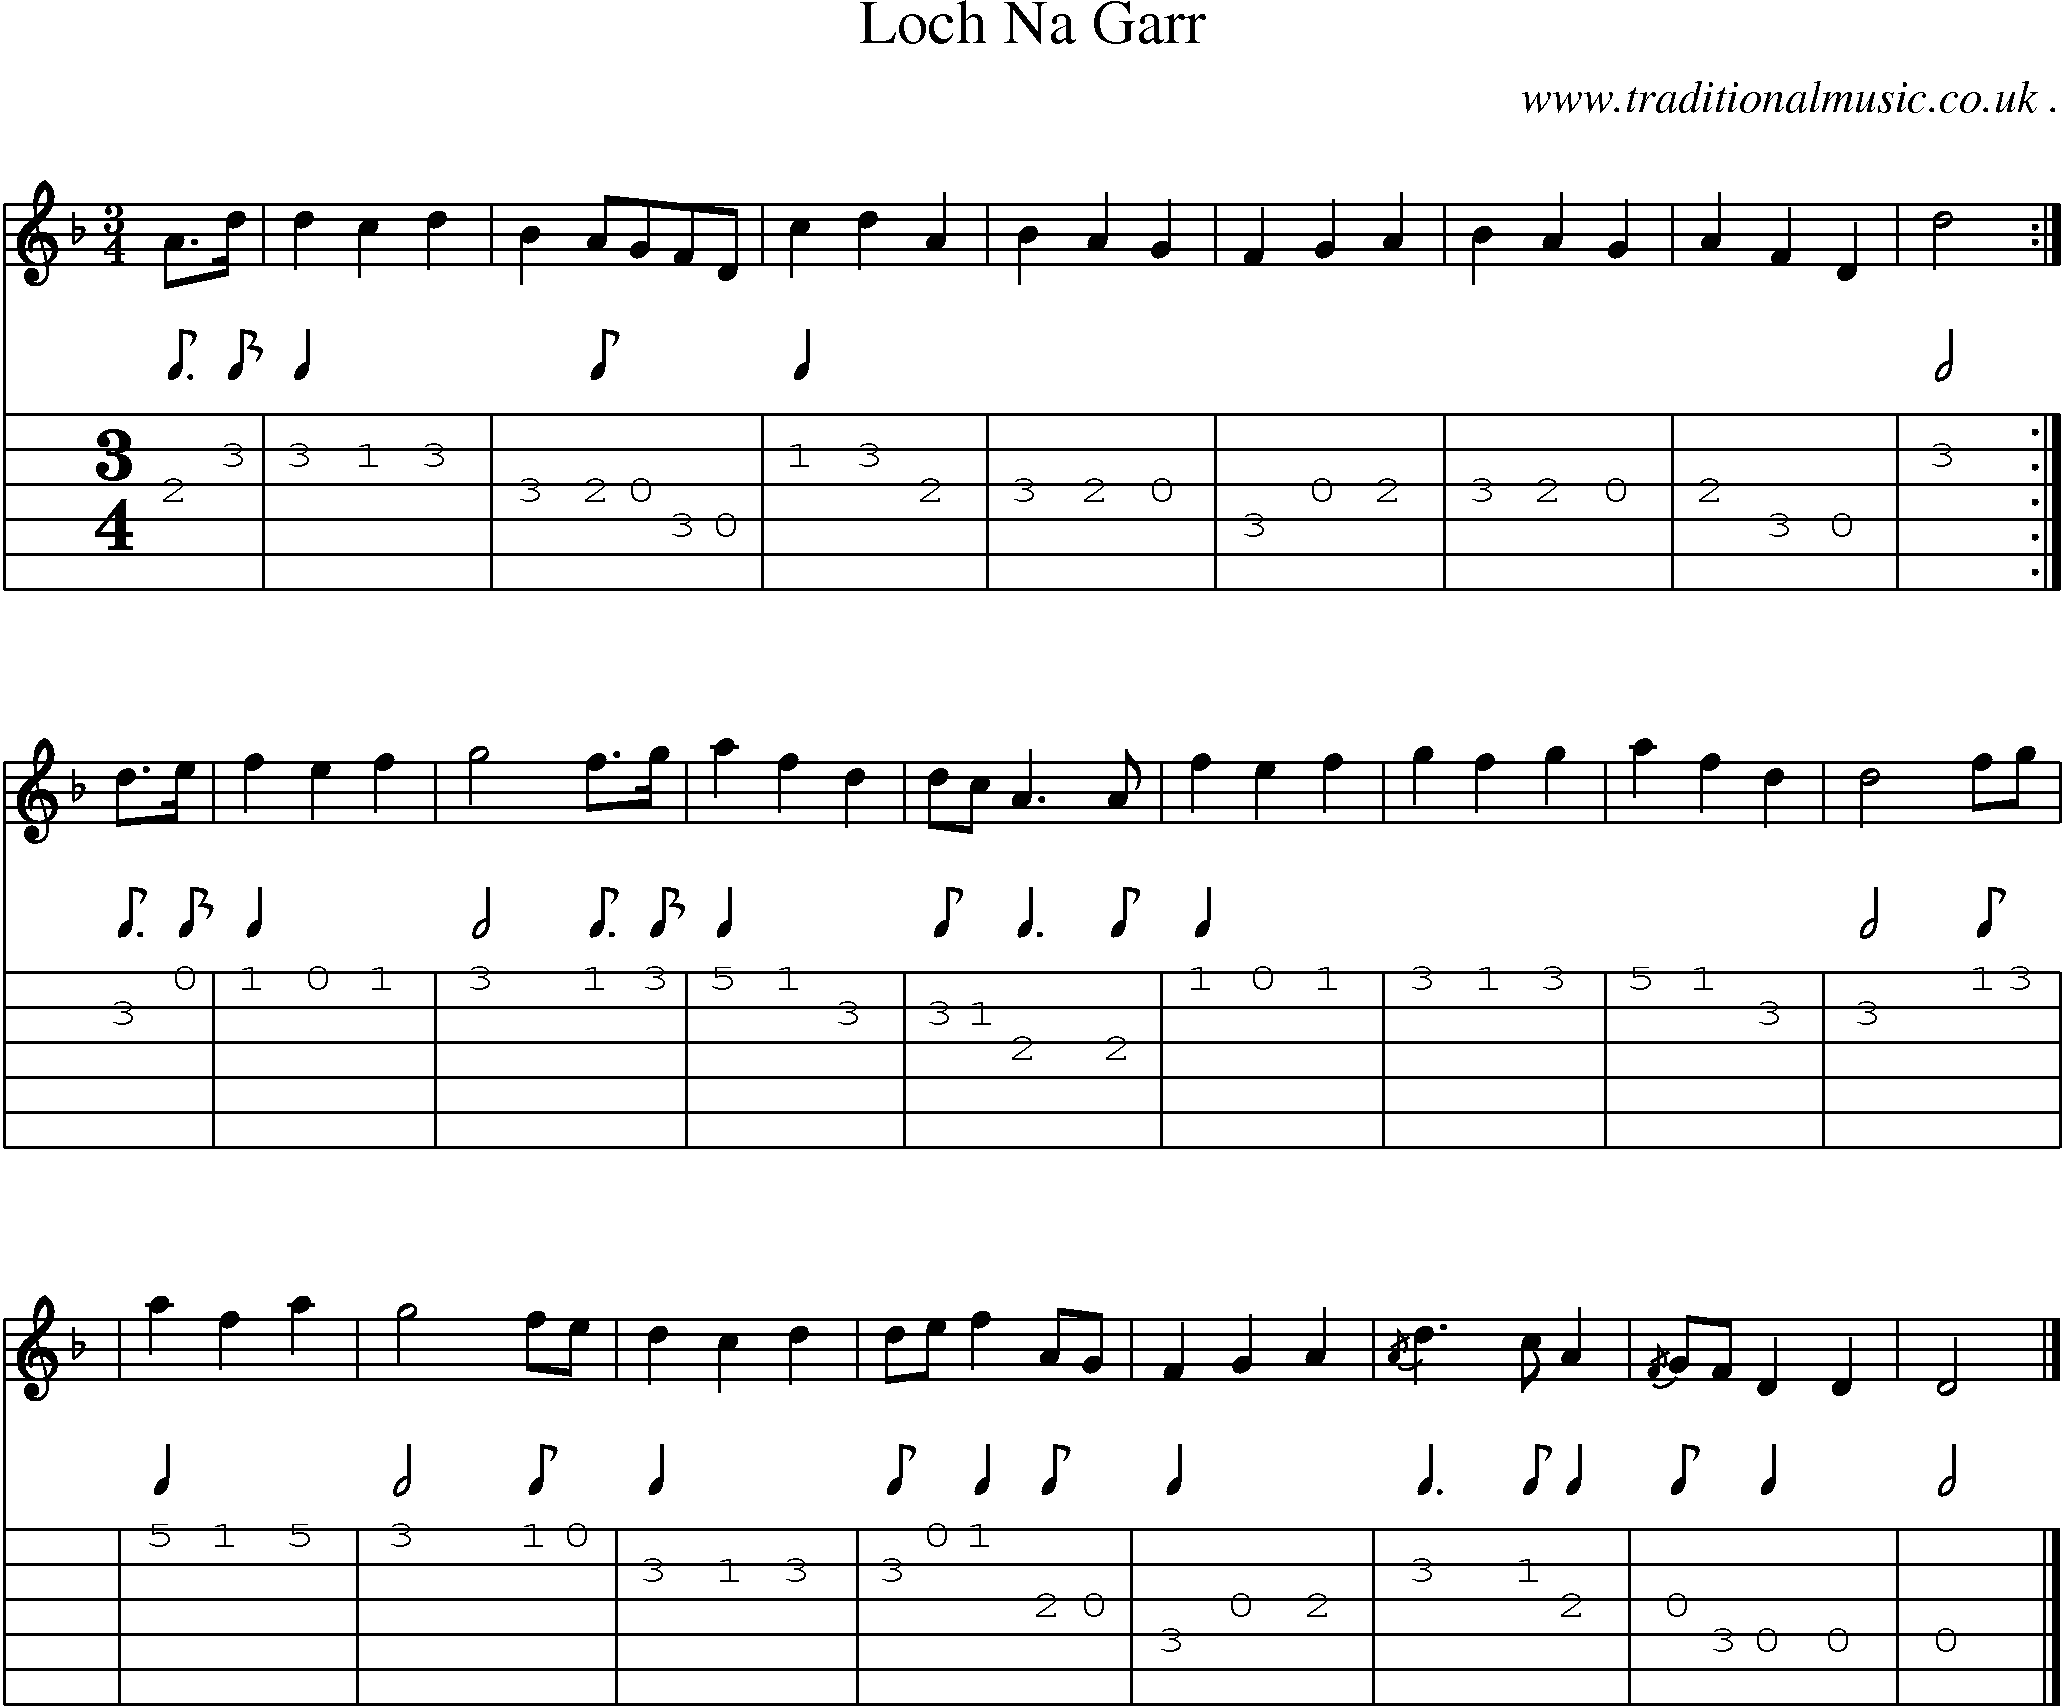 Sheet-music  score, Chords and Guitar Tabs for Loch Na Garr